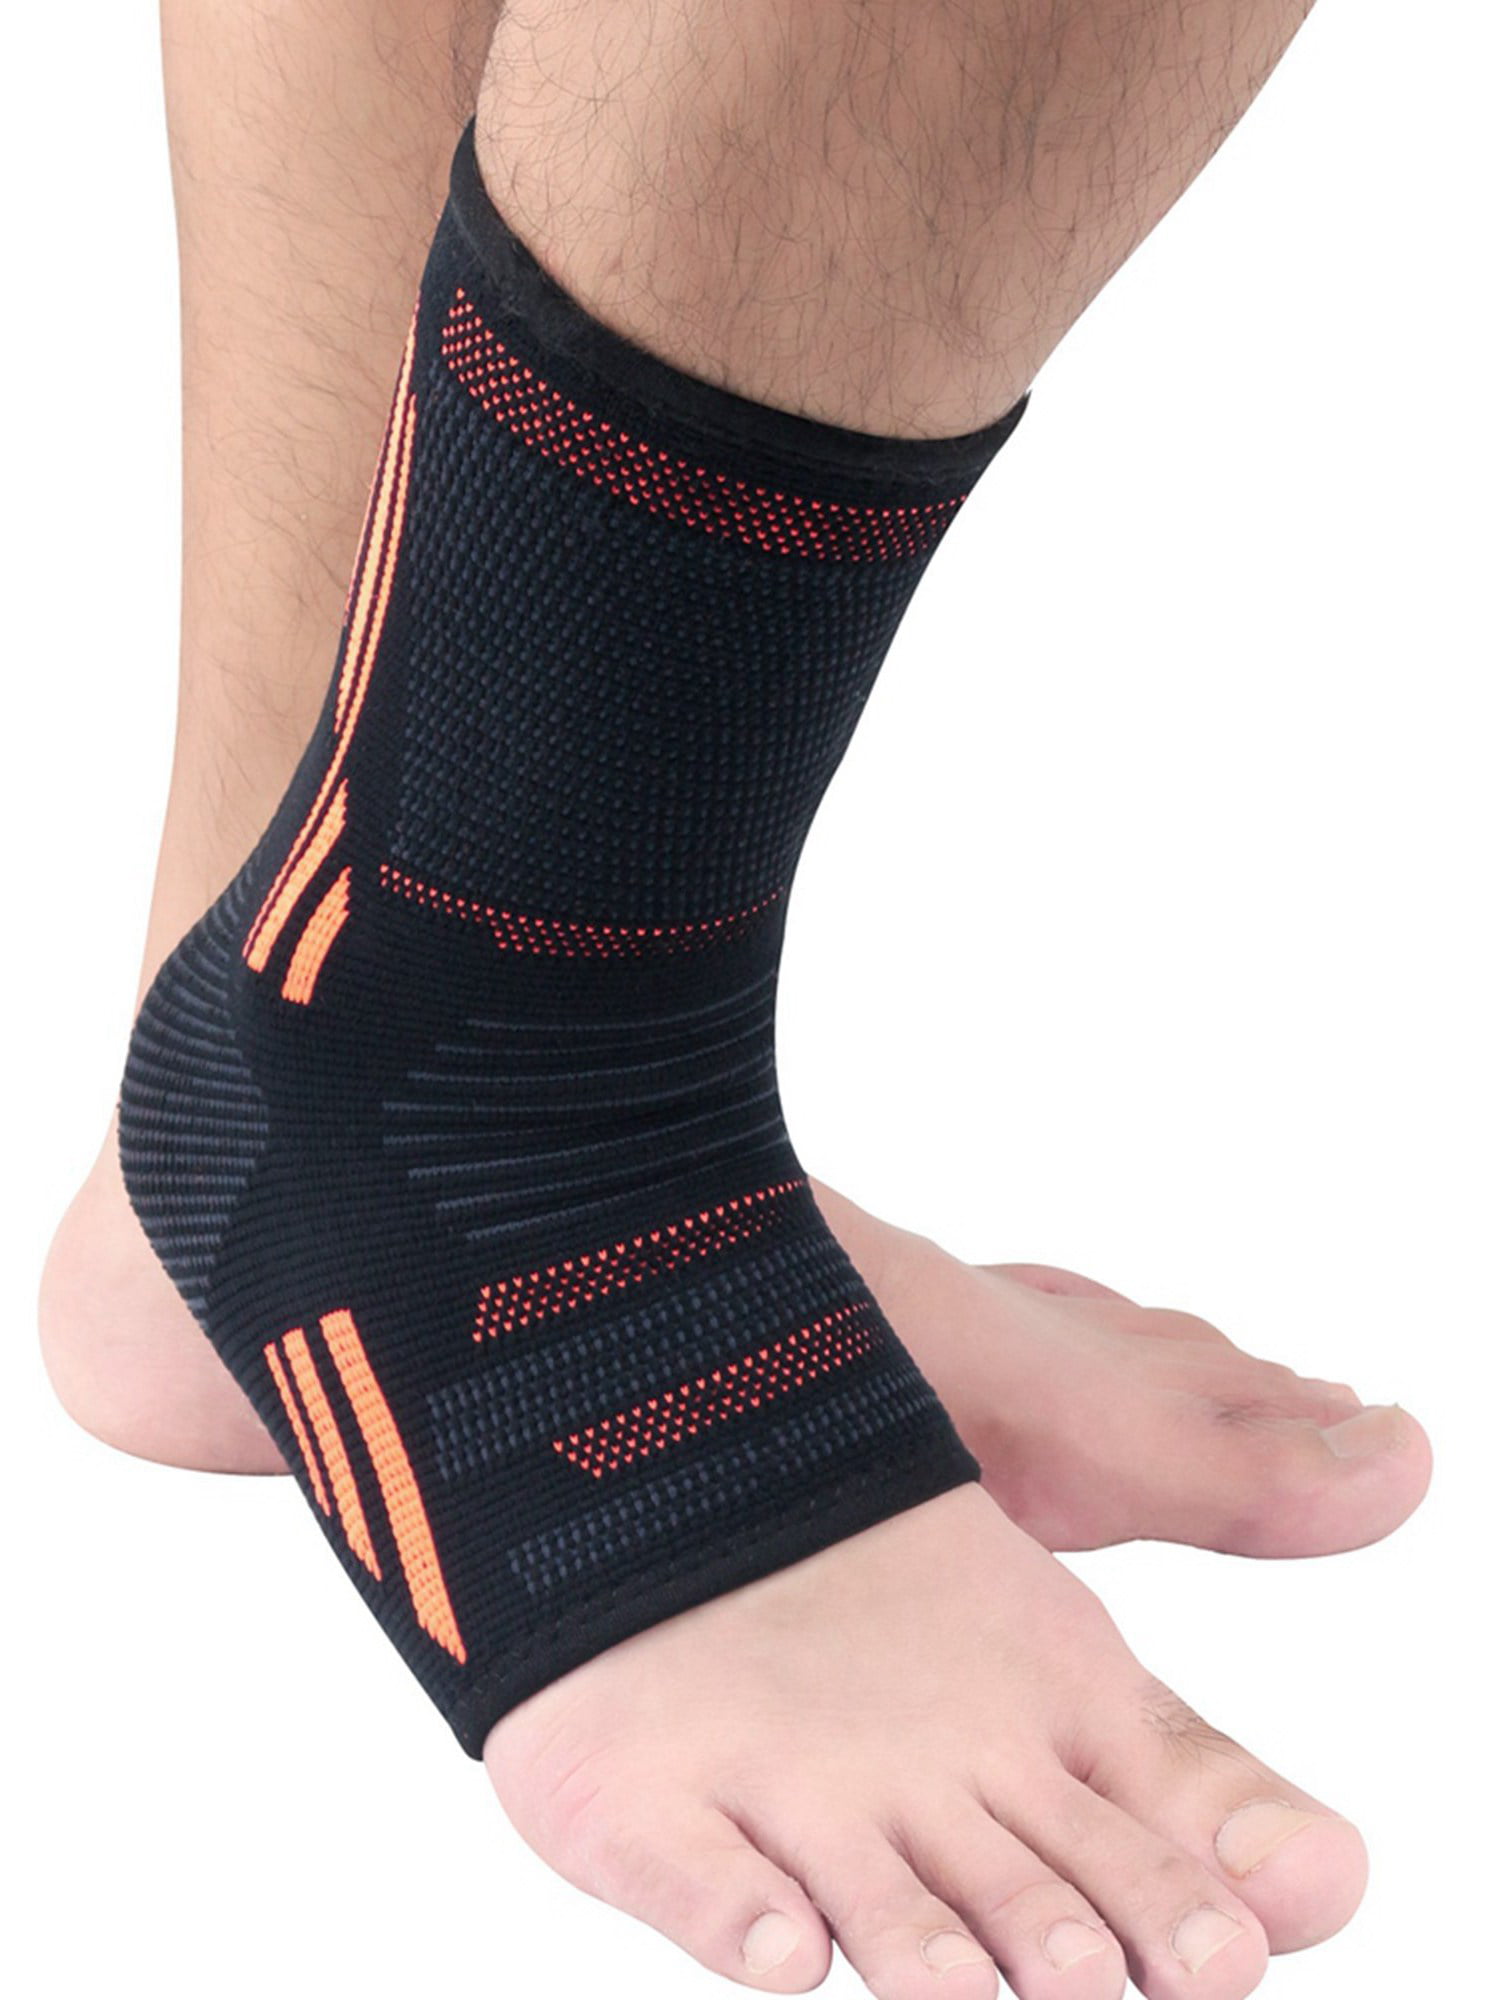 Single Large Elastic & Breathable Ankle Support Compression Sleeves Ankle Stabilizer/Foot Protection Socks with Silicone Pad for Sprain Relieves Pain Running Men Women Ankle Brace 